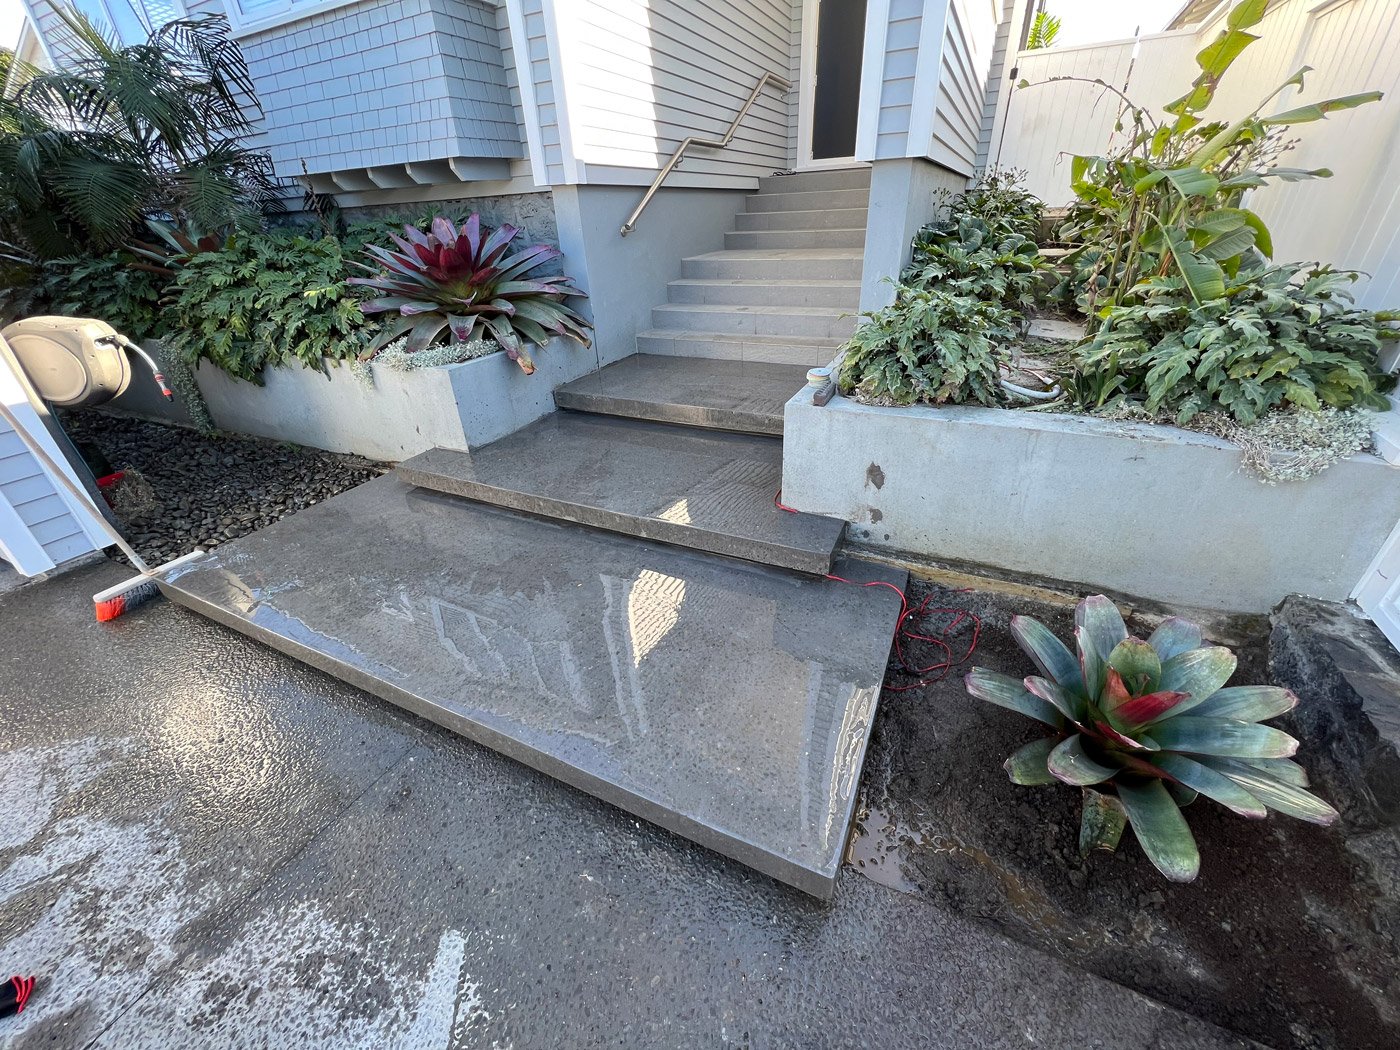 Freshly cleaned floating concrete front steps to a house with plants on the sides in the garden supported by a concrete retaining wall